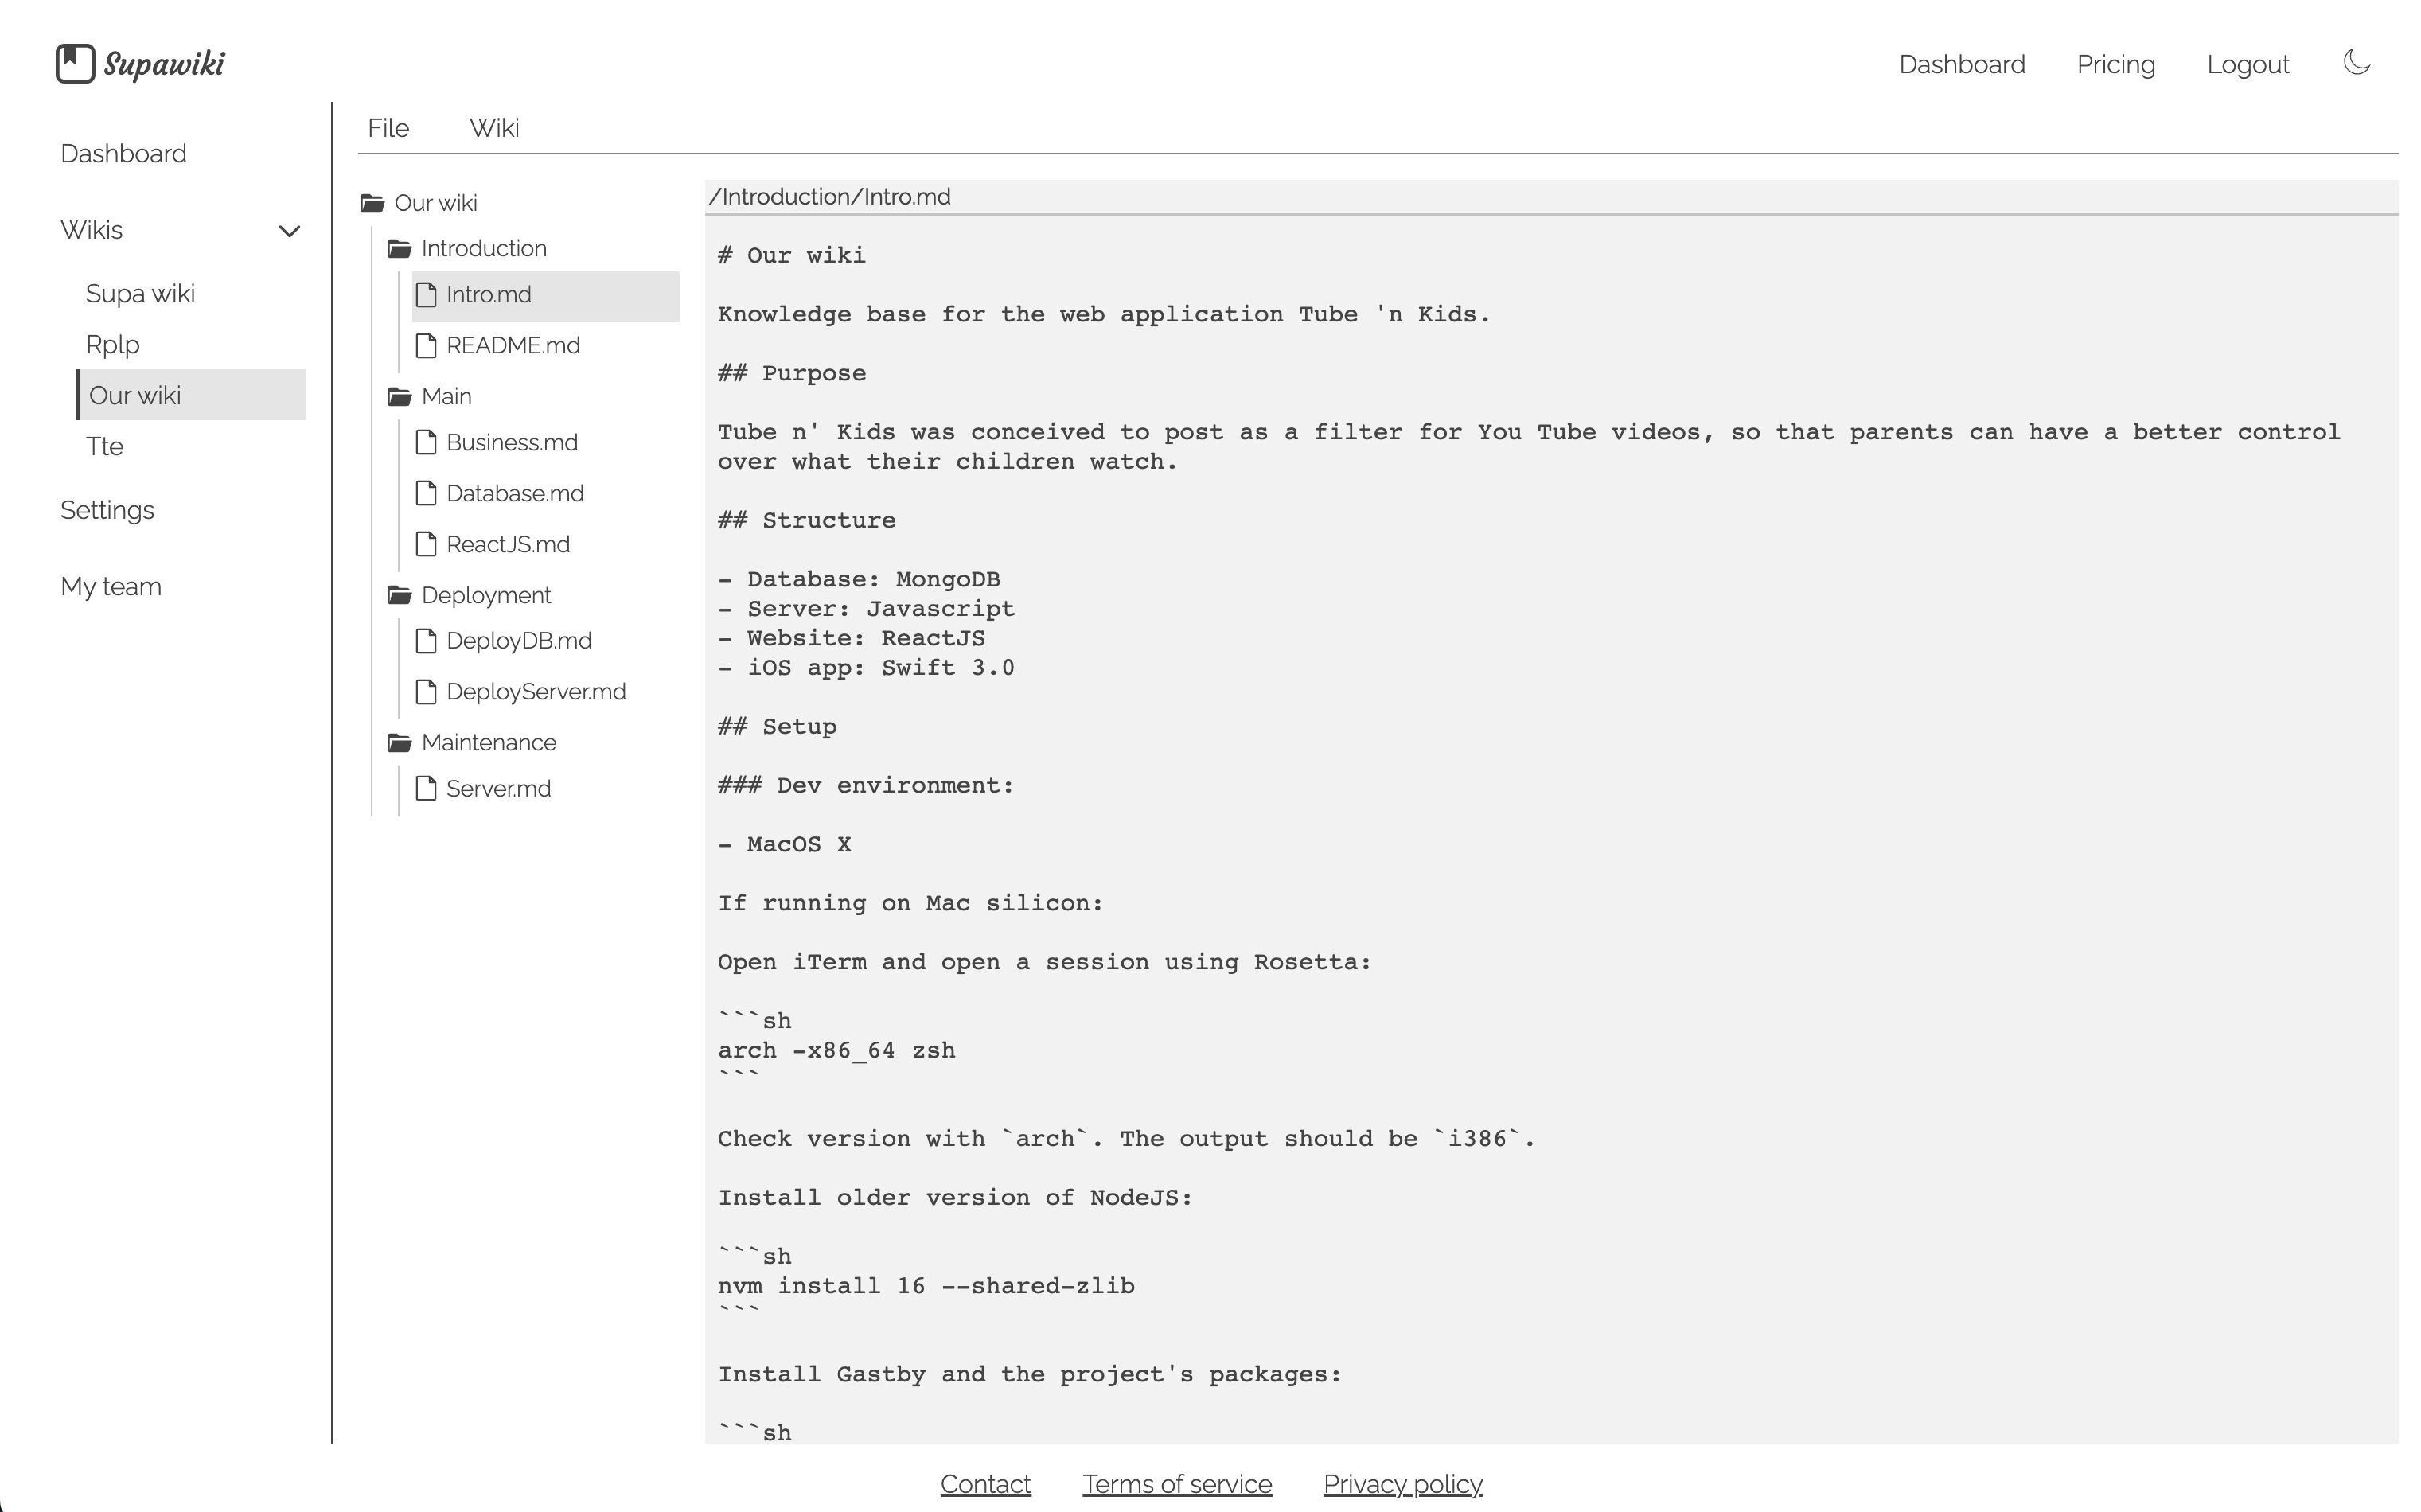 View of a markdown file being edited in Supawiki